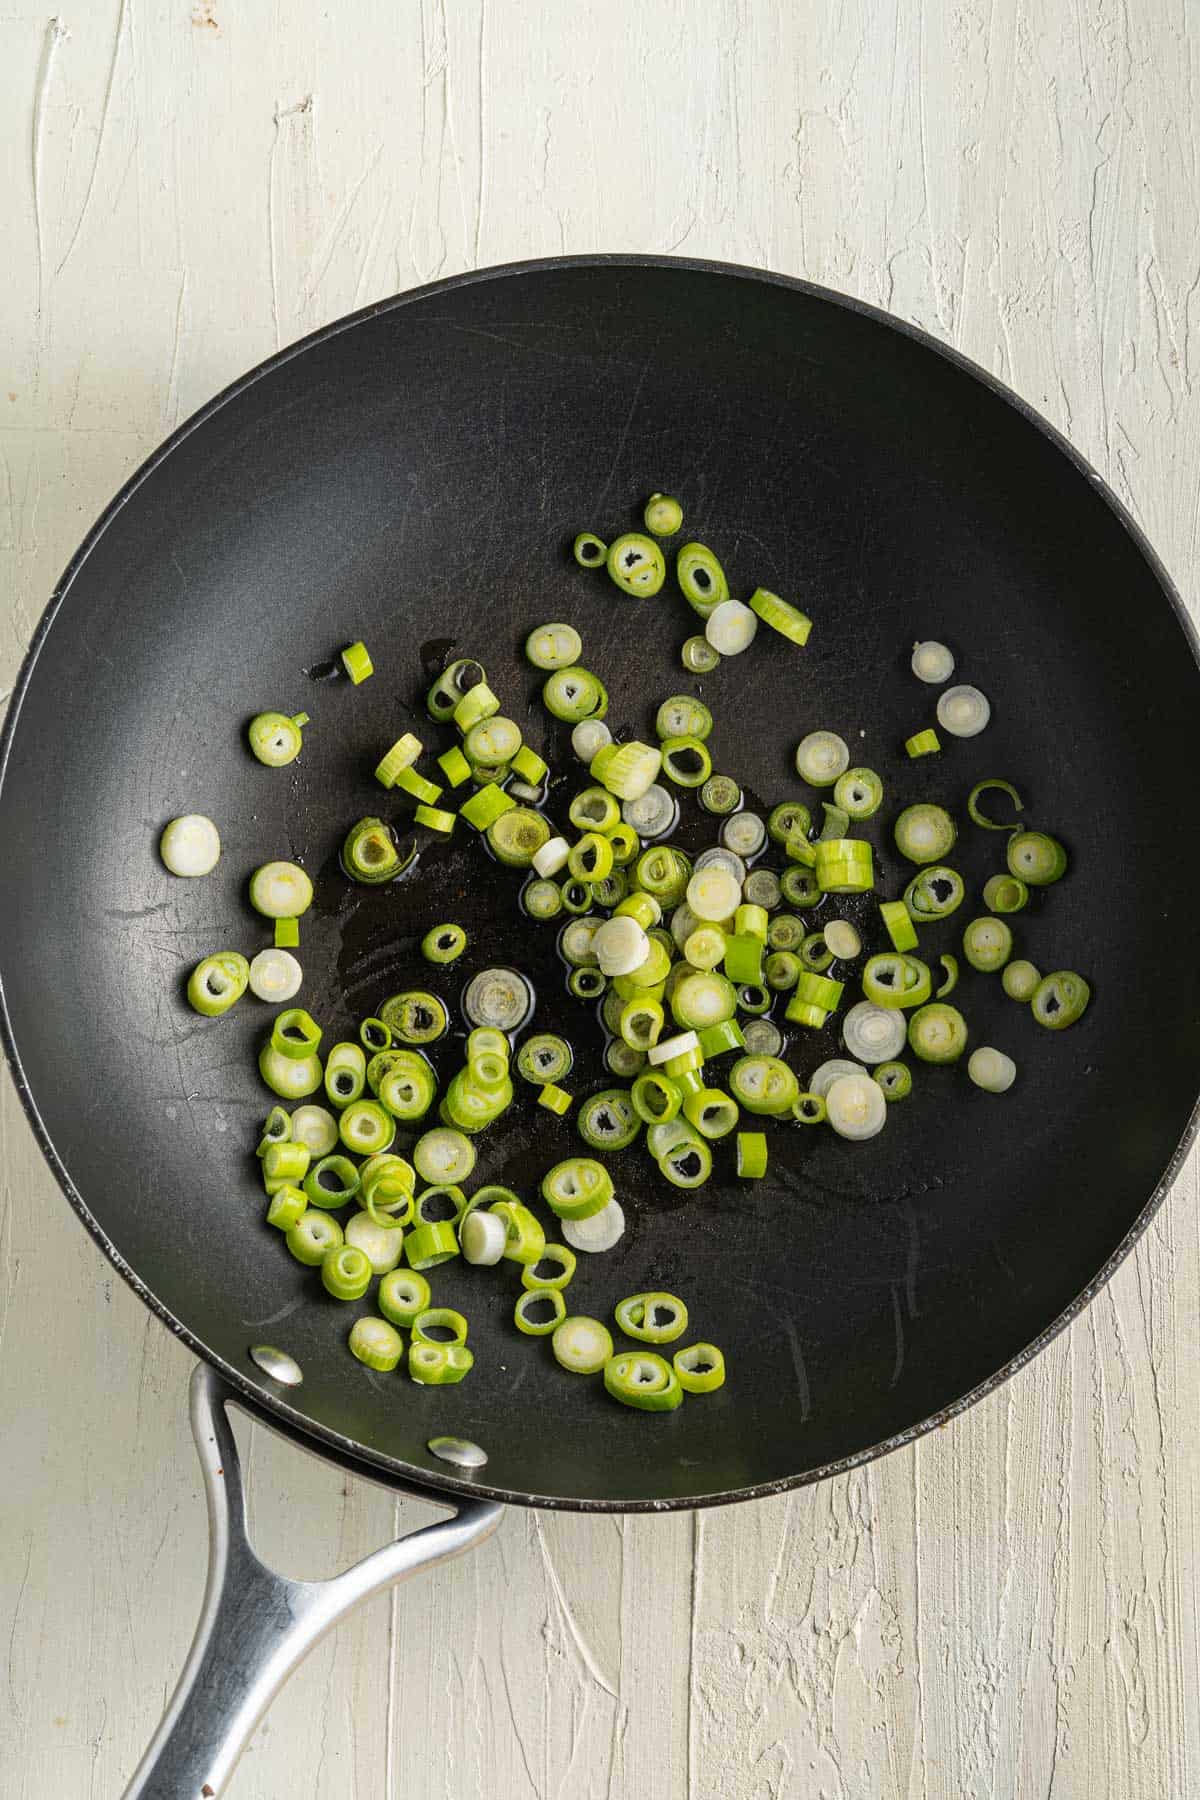 A black frying pan containing chopped green onions on a light-colored surface.